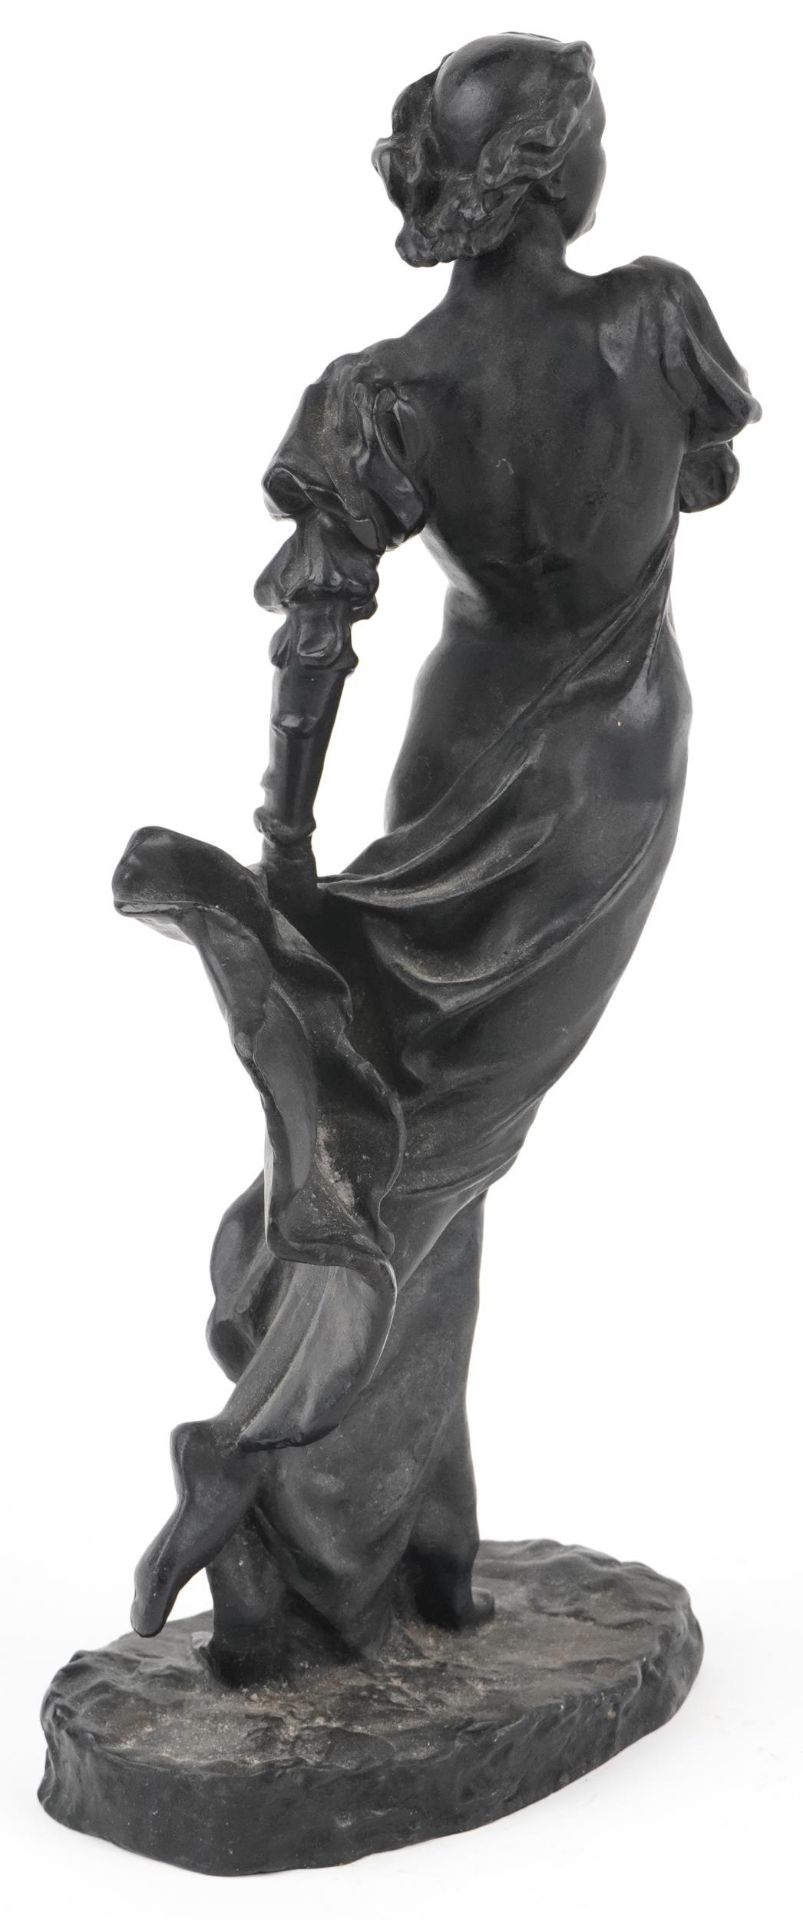 1970s Russian cast iron statuette of a female wearing a flowing dress, Cyrillic script and dated - Image 3 of 5